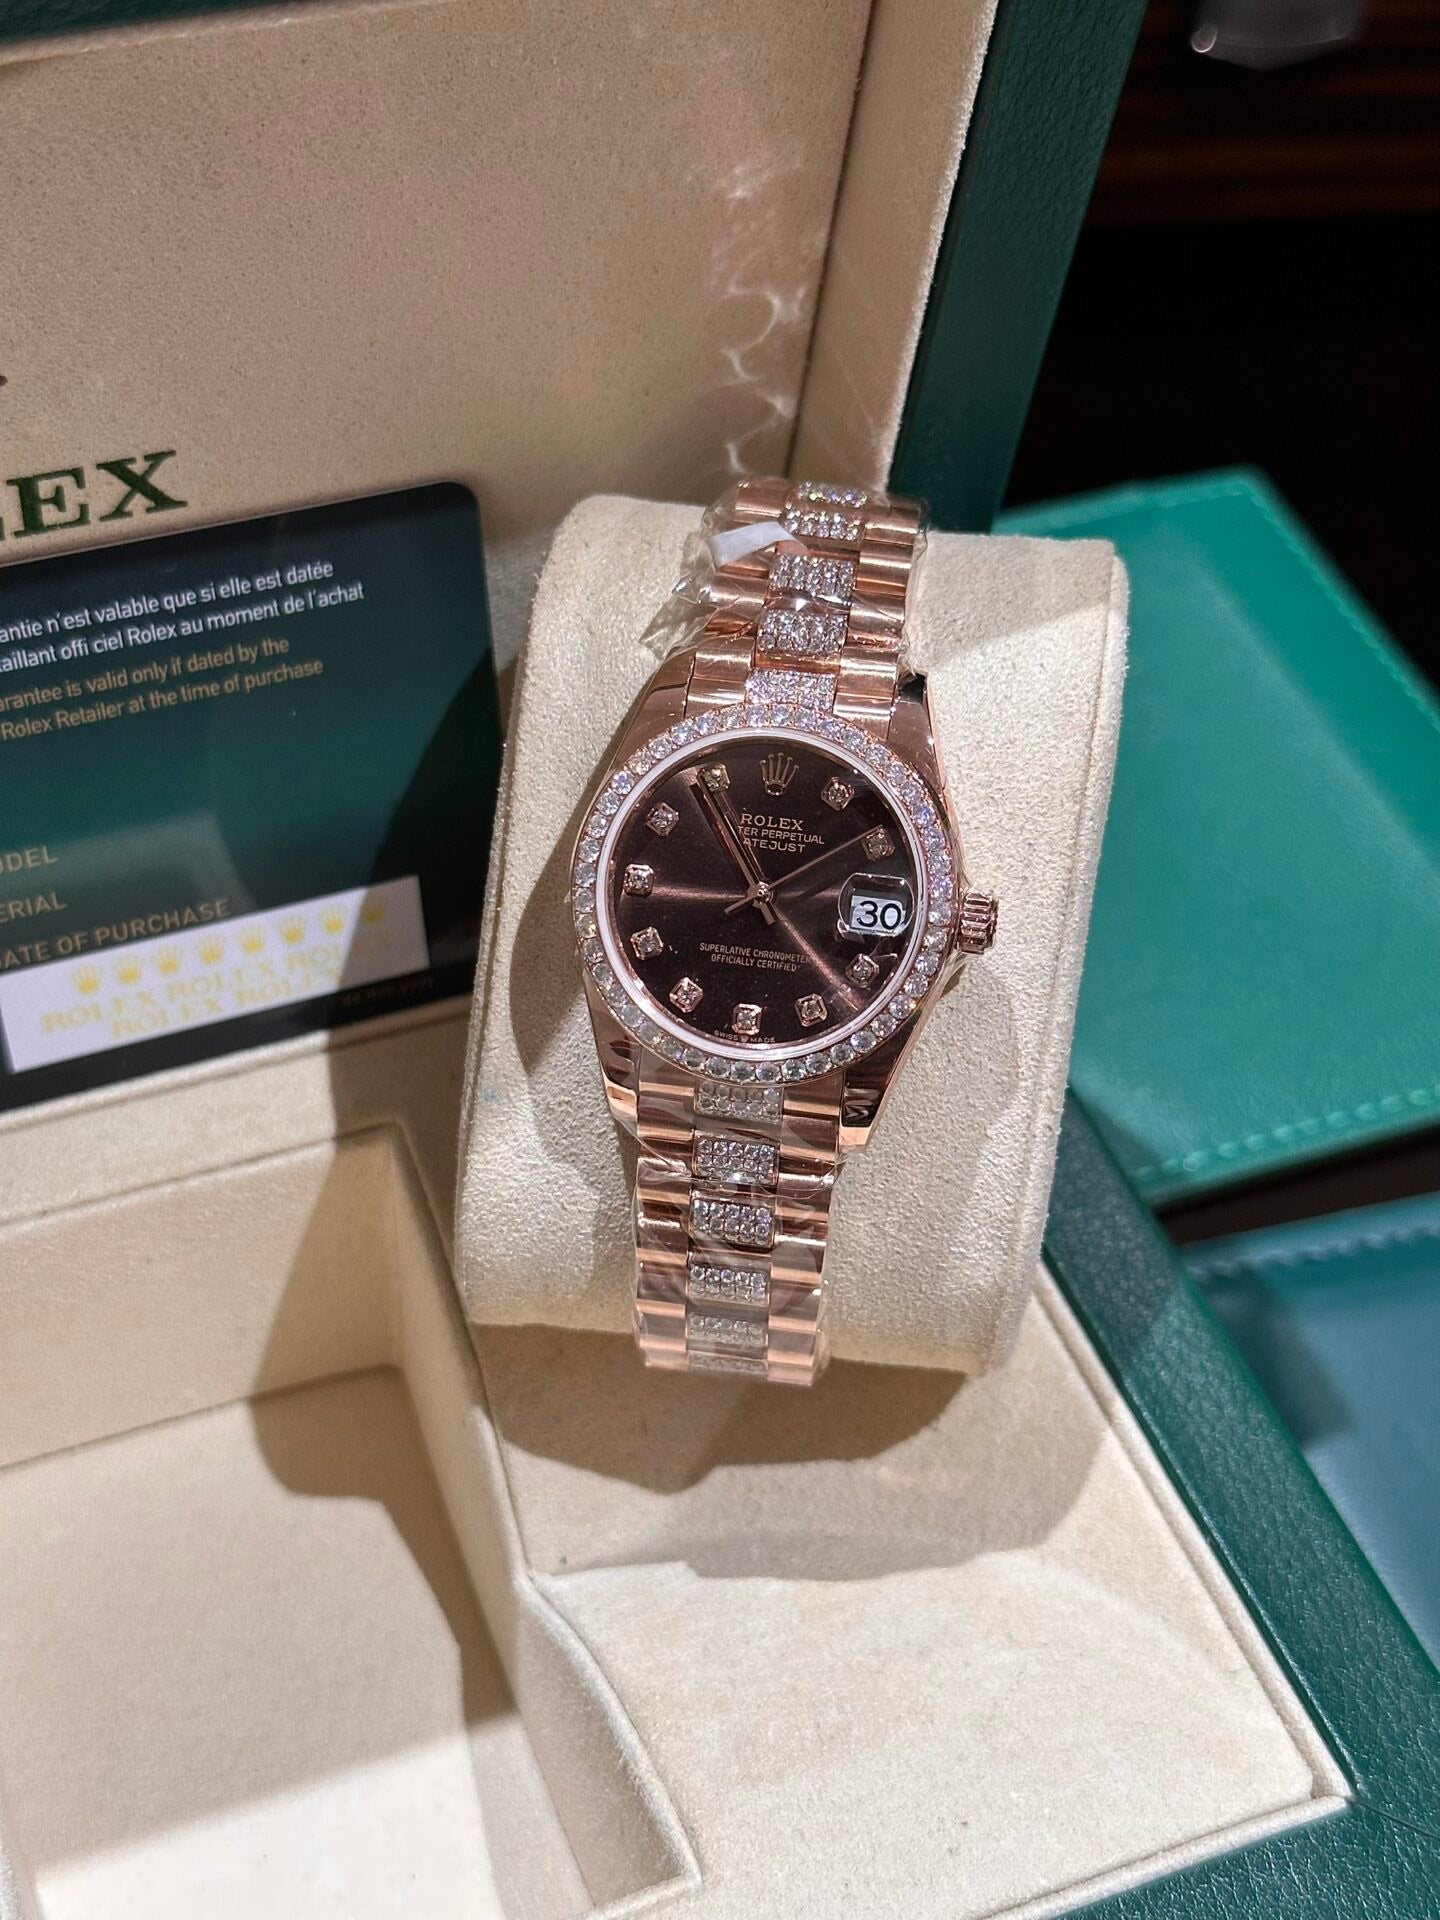 Rolex Datejust 31 278275 wrapped 18k rose gold and diamonds 1:1 best edition